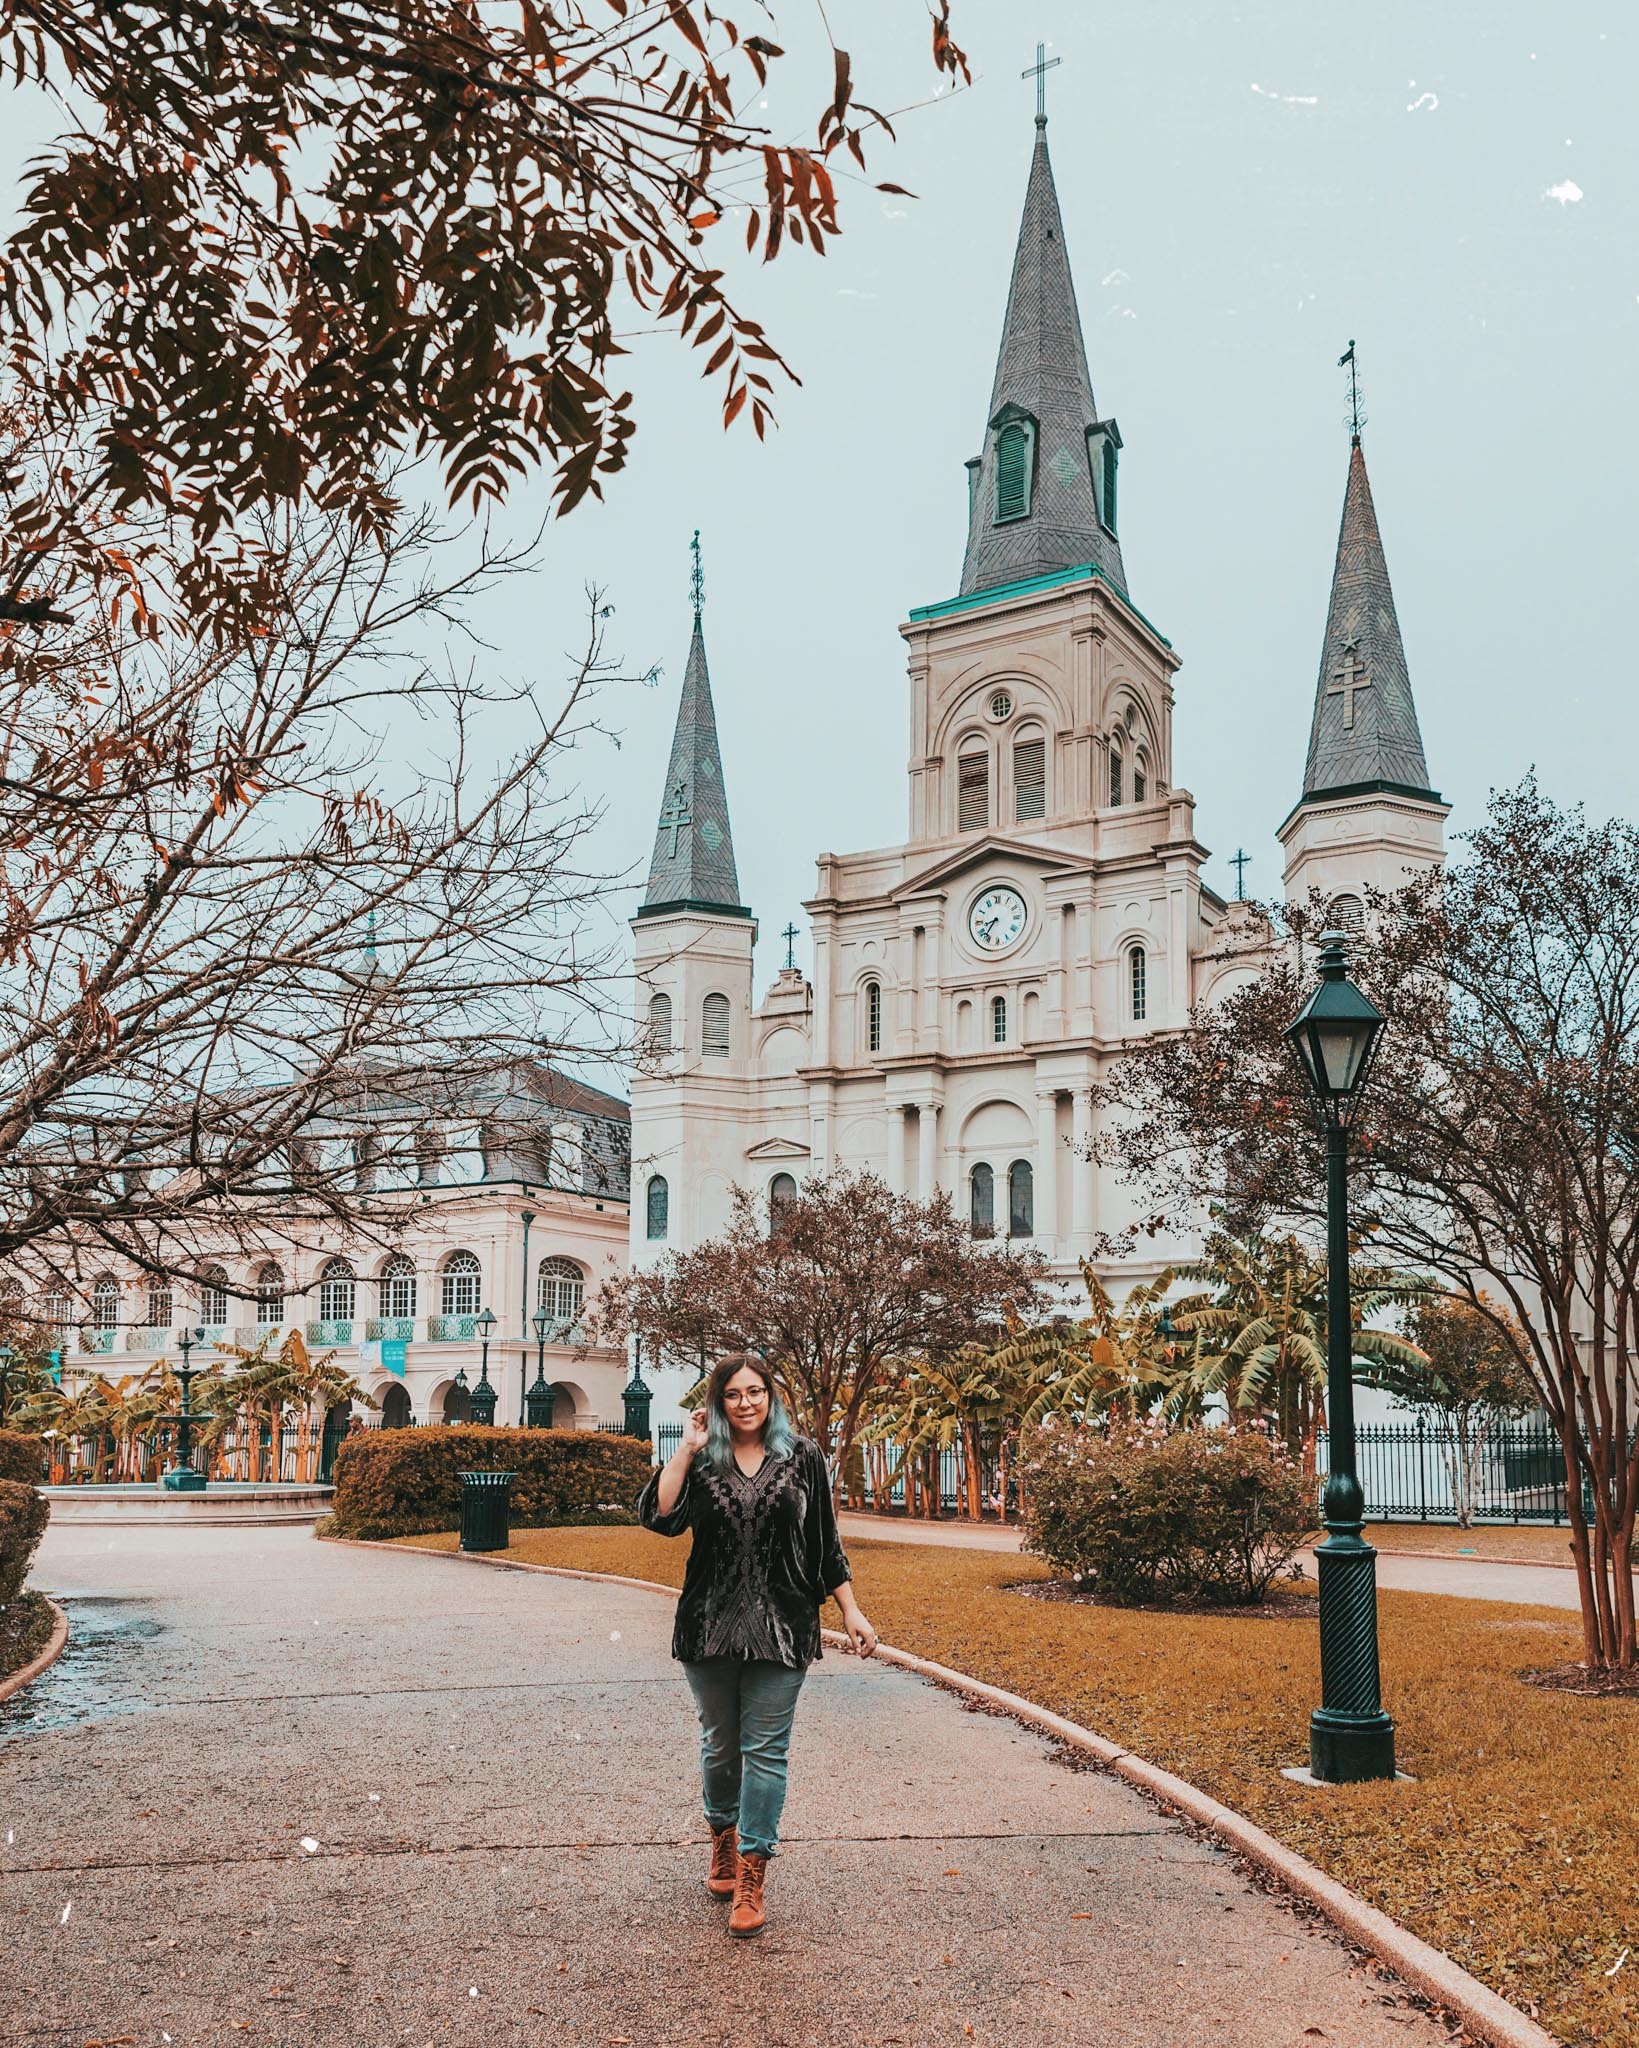 St. Louis Cathedral and Jackson Square // The Most Instagrammable Spots in New Orleans // #readysetjetset www.readysetjetset.net